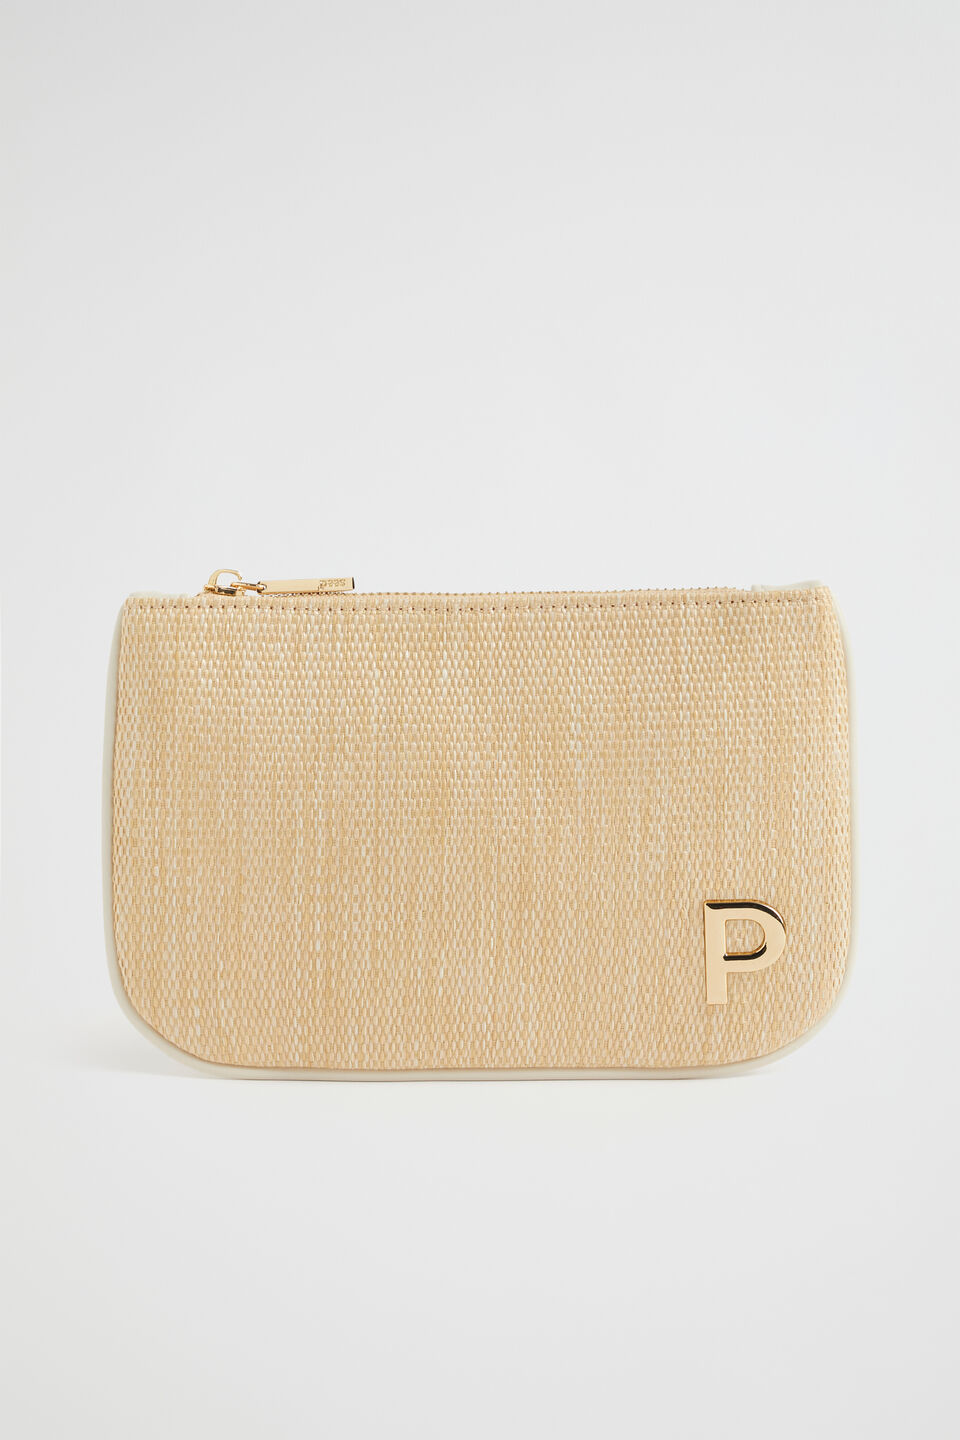 Initial Pouch  P